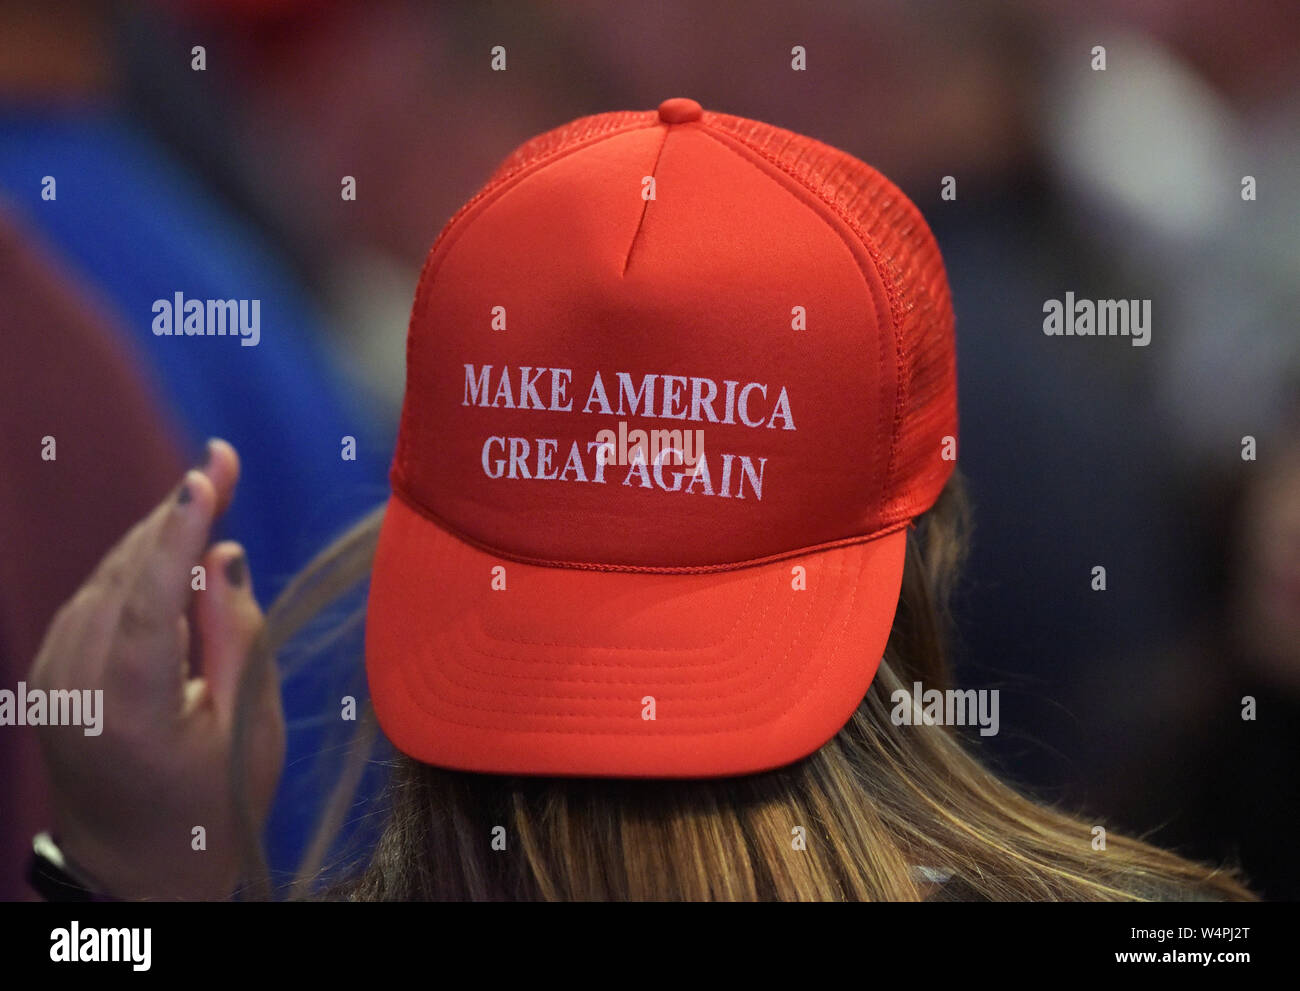 RED Foam Front MAKE AMERICA GREAT AGAIN Trump Mesh HAT with Rope 